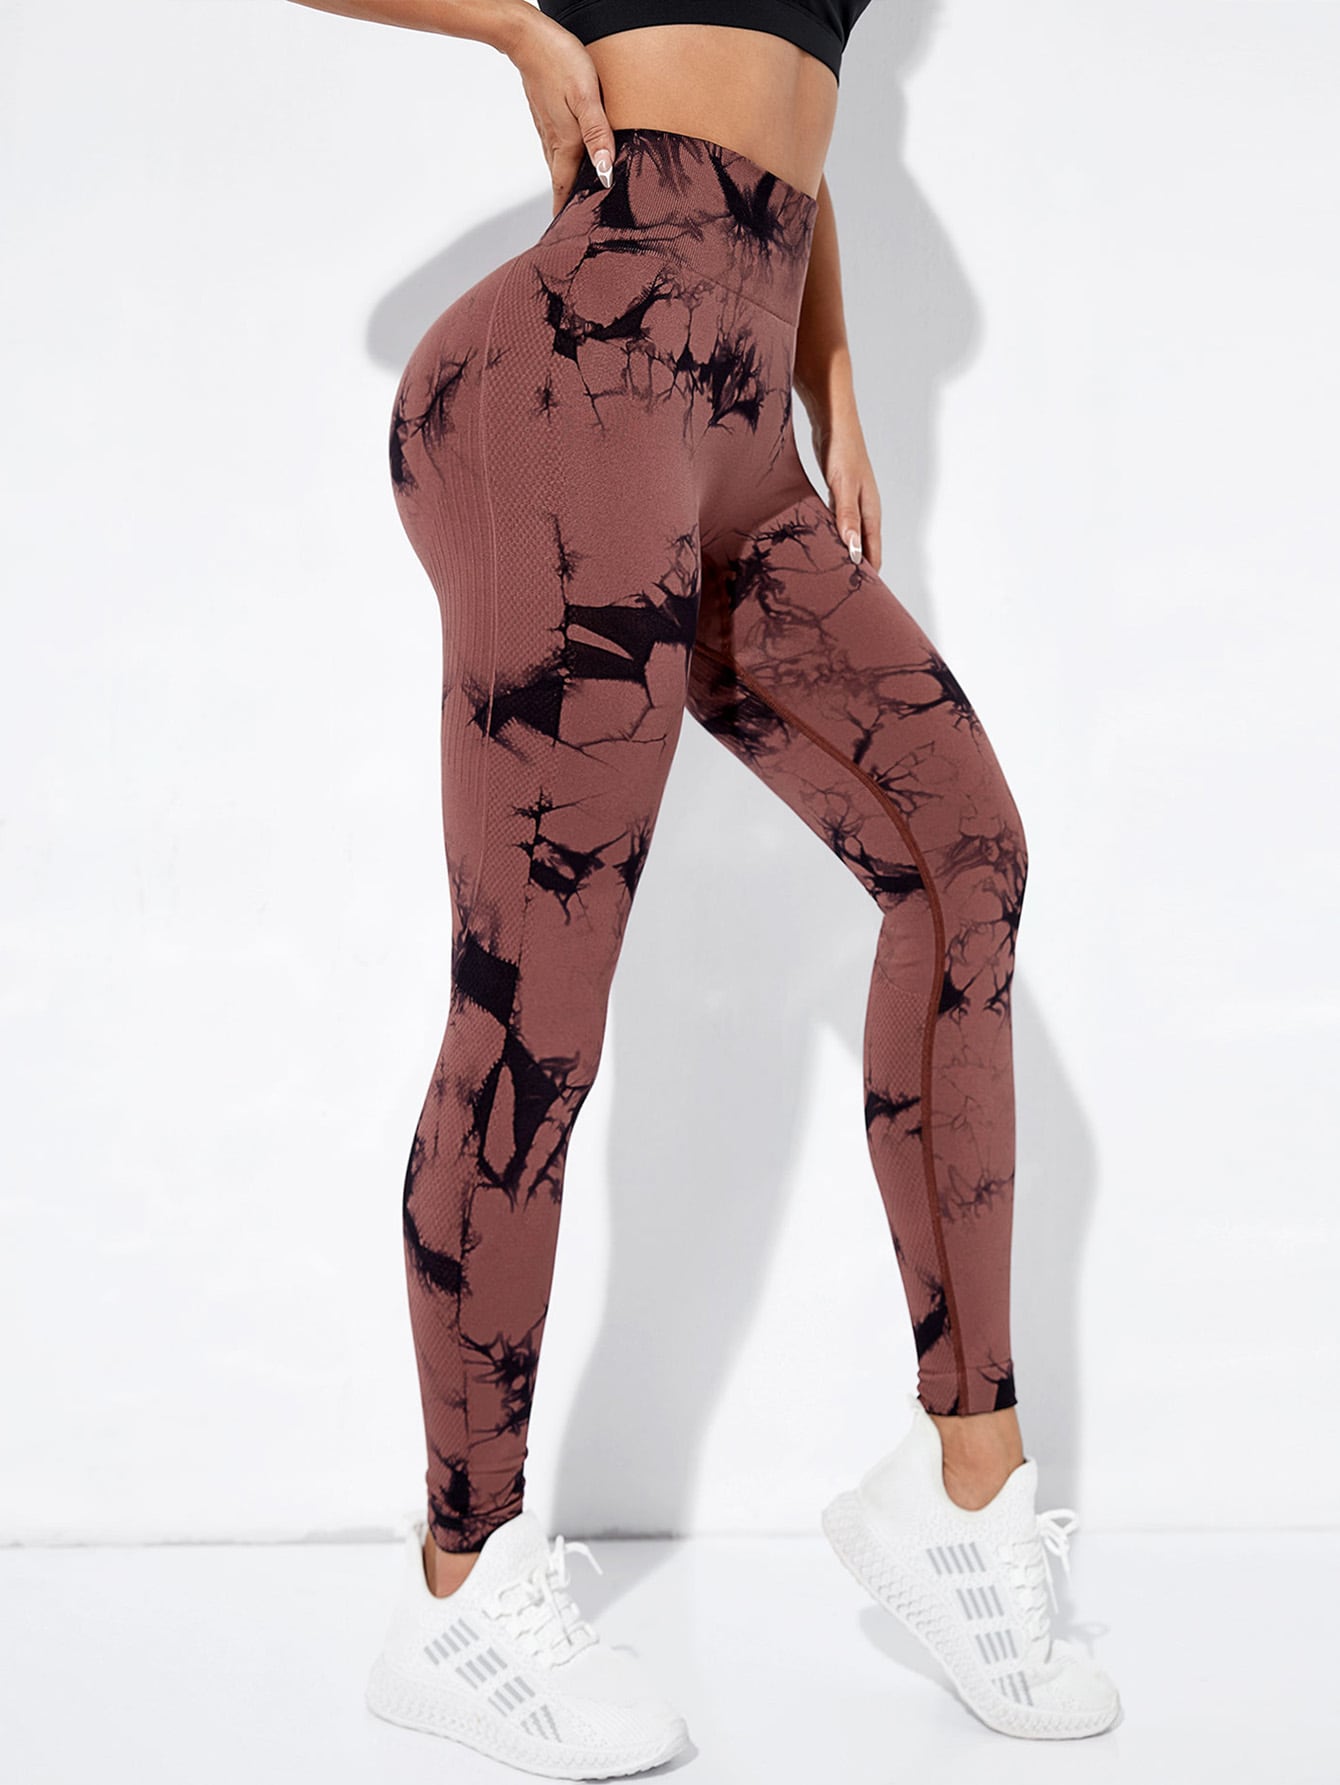 Women's Casual Classic Style Sports Tie Dye Nylon Spandex Active Bottoms Leggings Skinny Pants Sweatpants display picture 2